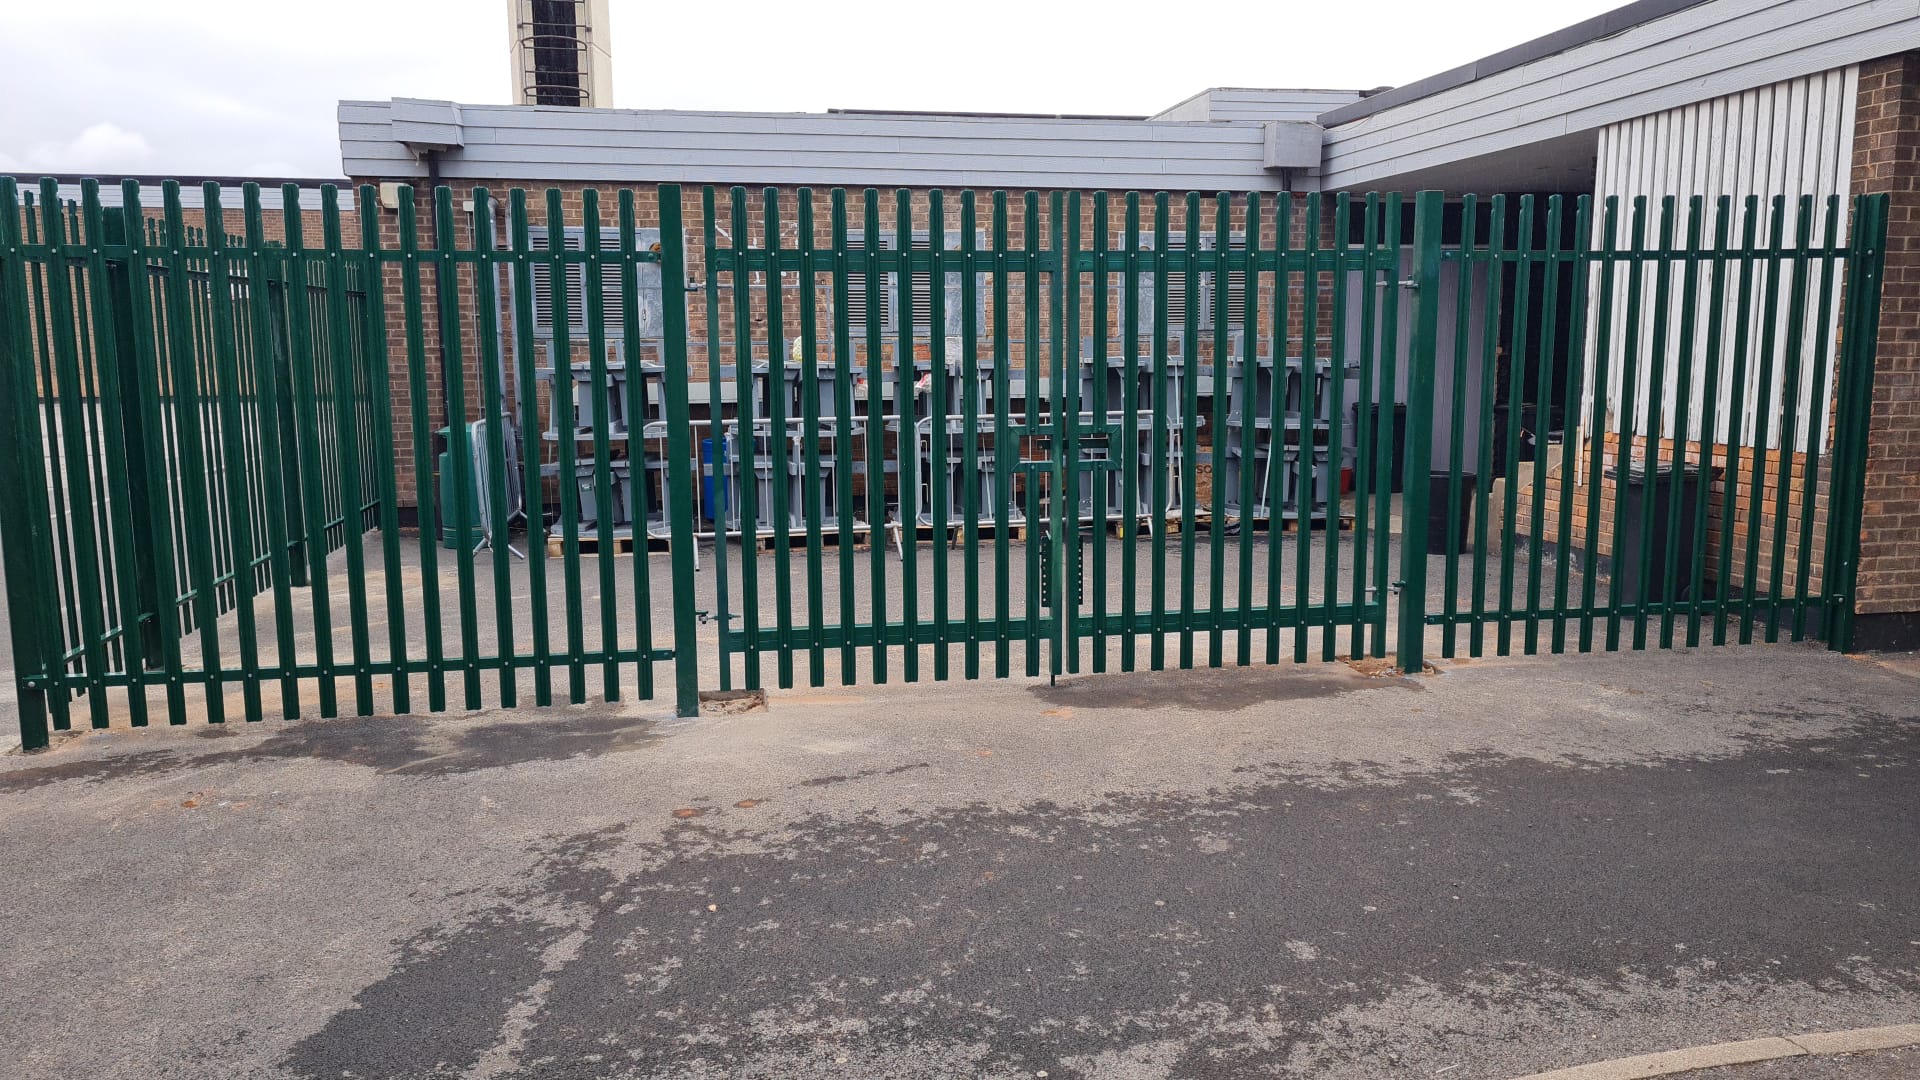 Round & Notched Palisade Fencing Supplied & Installed for a School in Doncaster